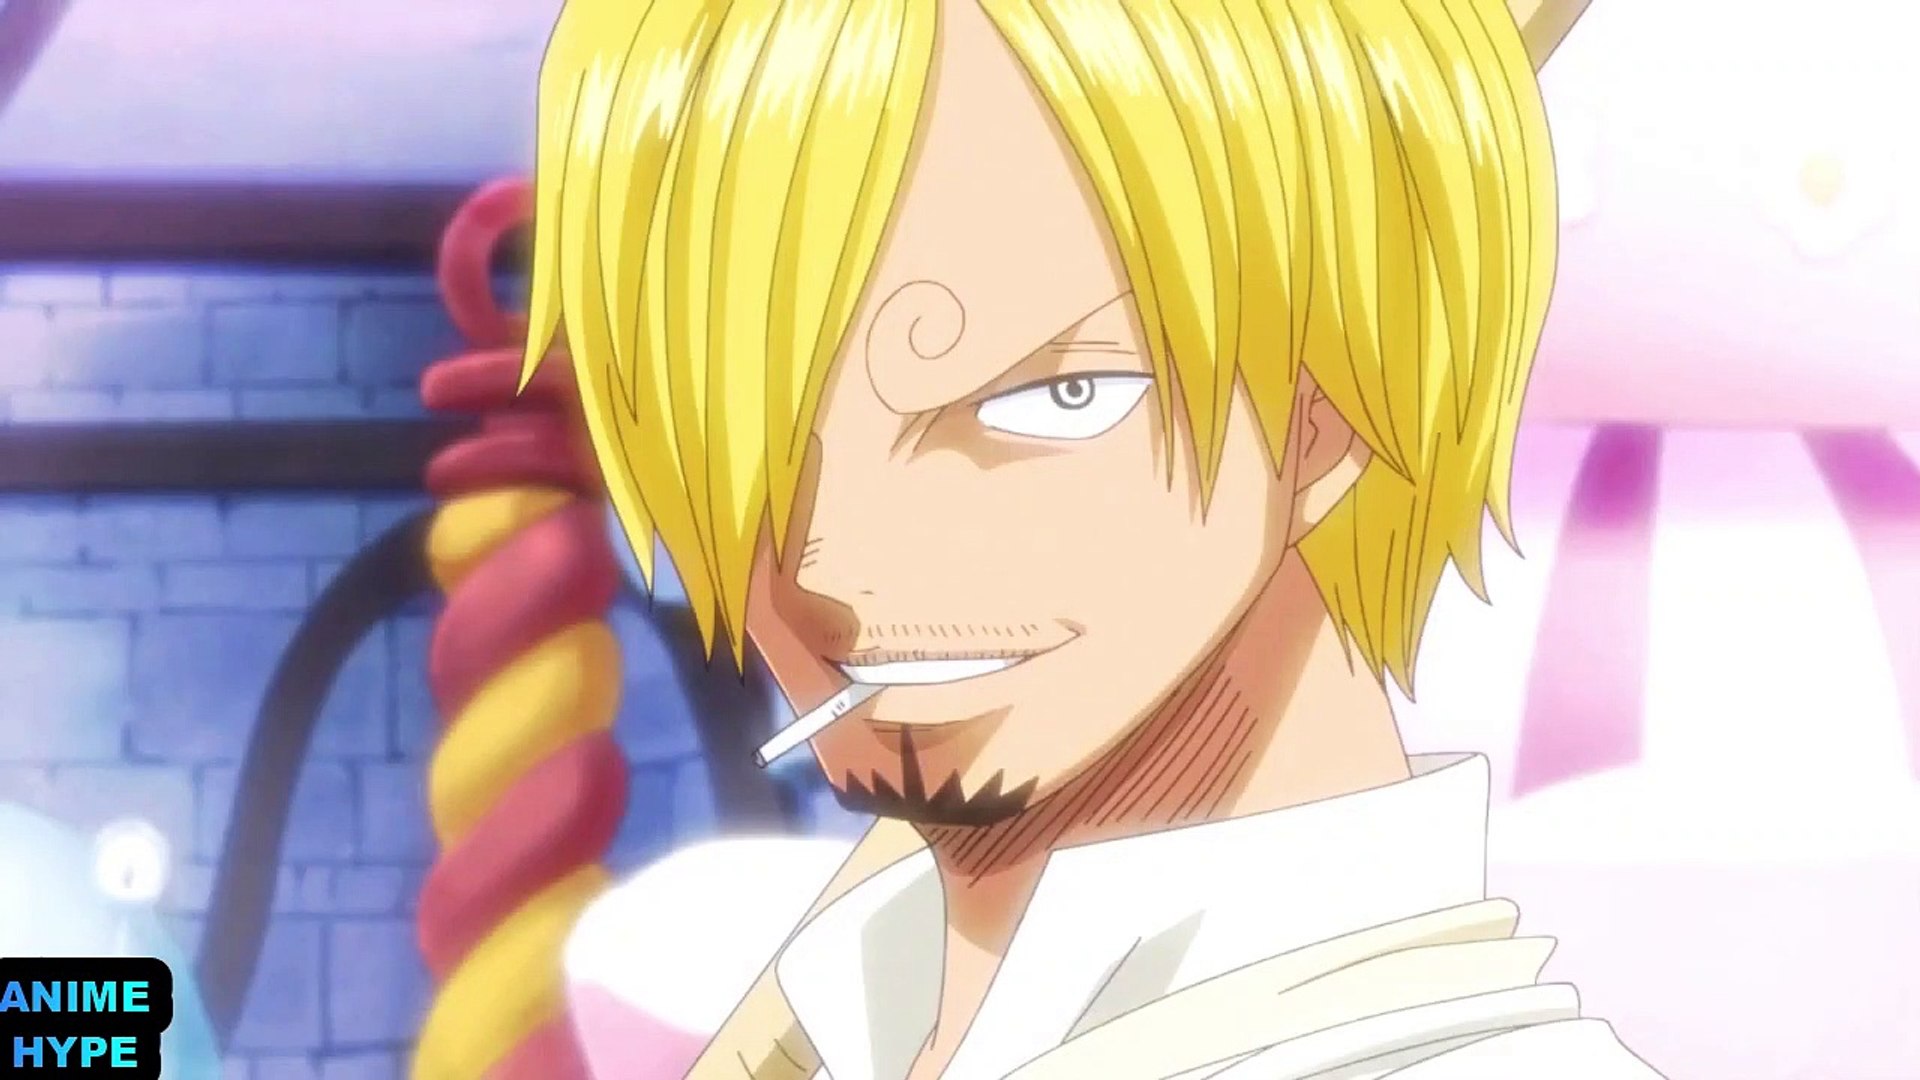 Pudding Erases Sanji S Memories One Piece 877 Eng Sub Hd Video Dailymotion